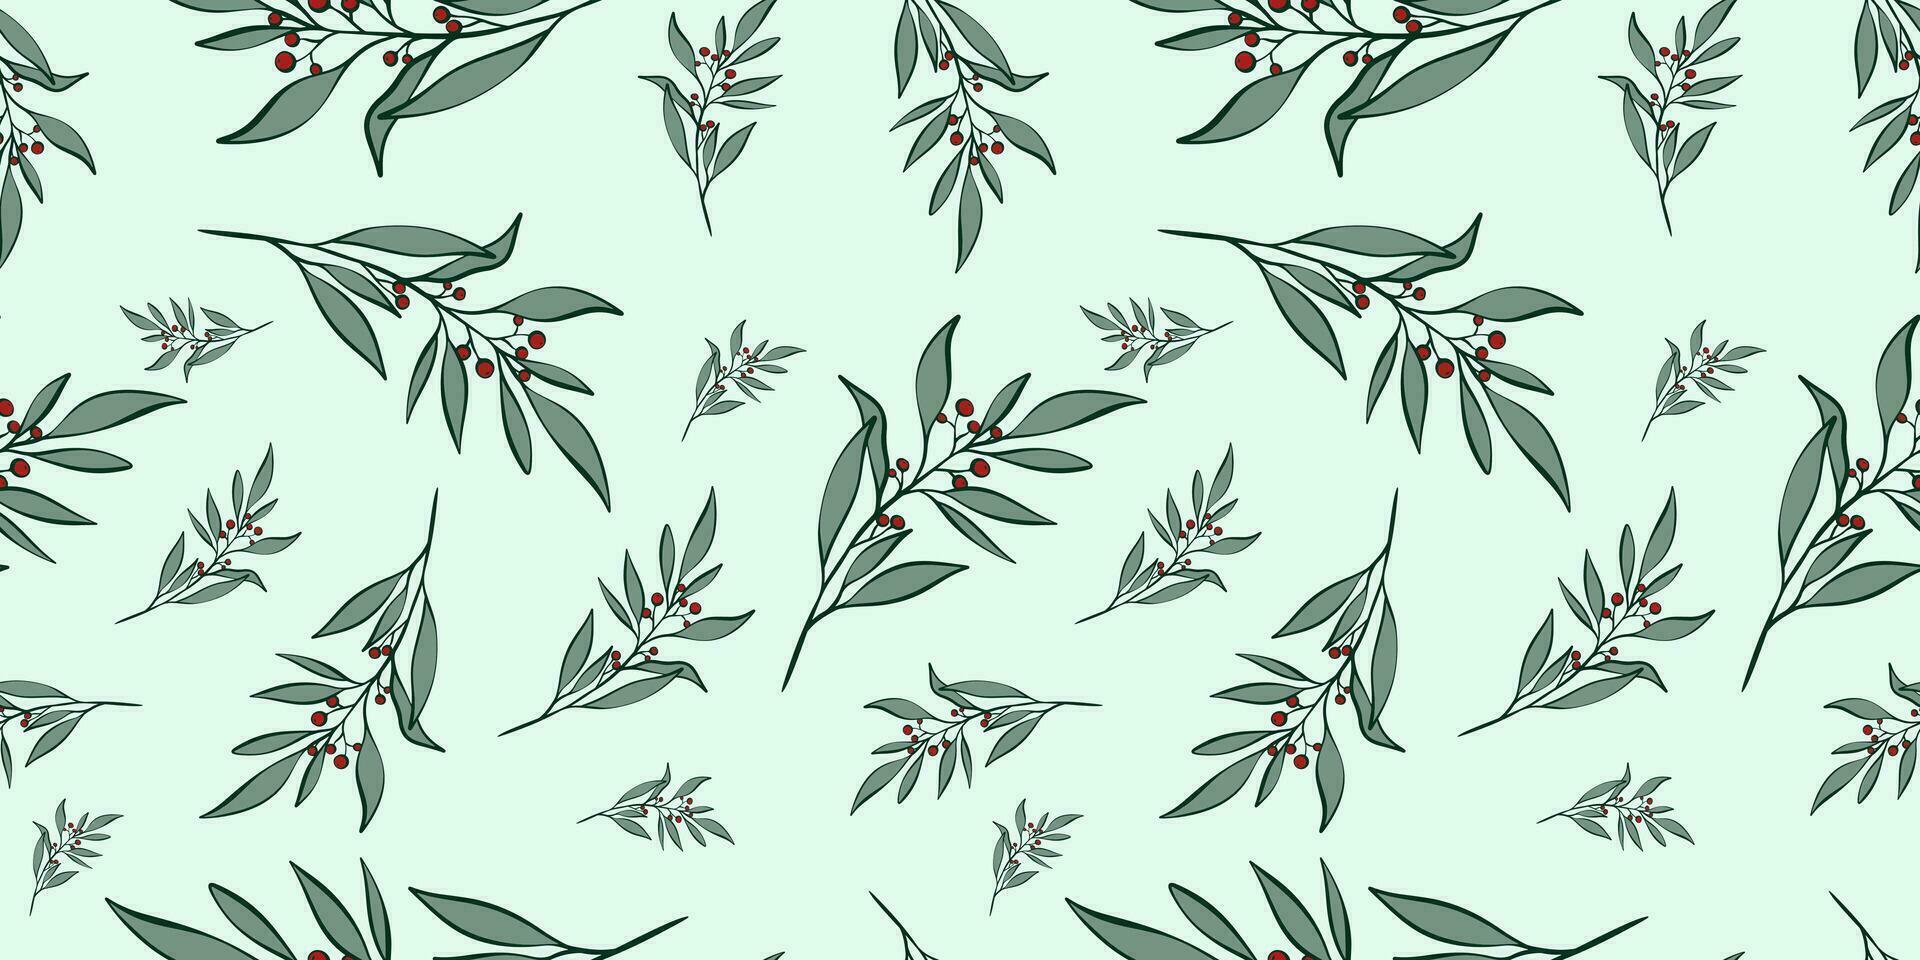 Seamless pattern with hand drawn christmas leaves and branches. Perfect for xmas or new year wallpaper, wrapping paper, web sites, background, social media, blog, presentation and greeting cards. vector